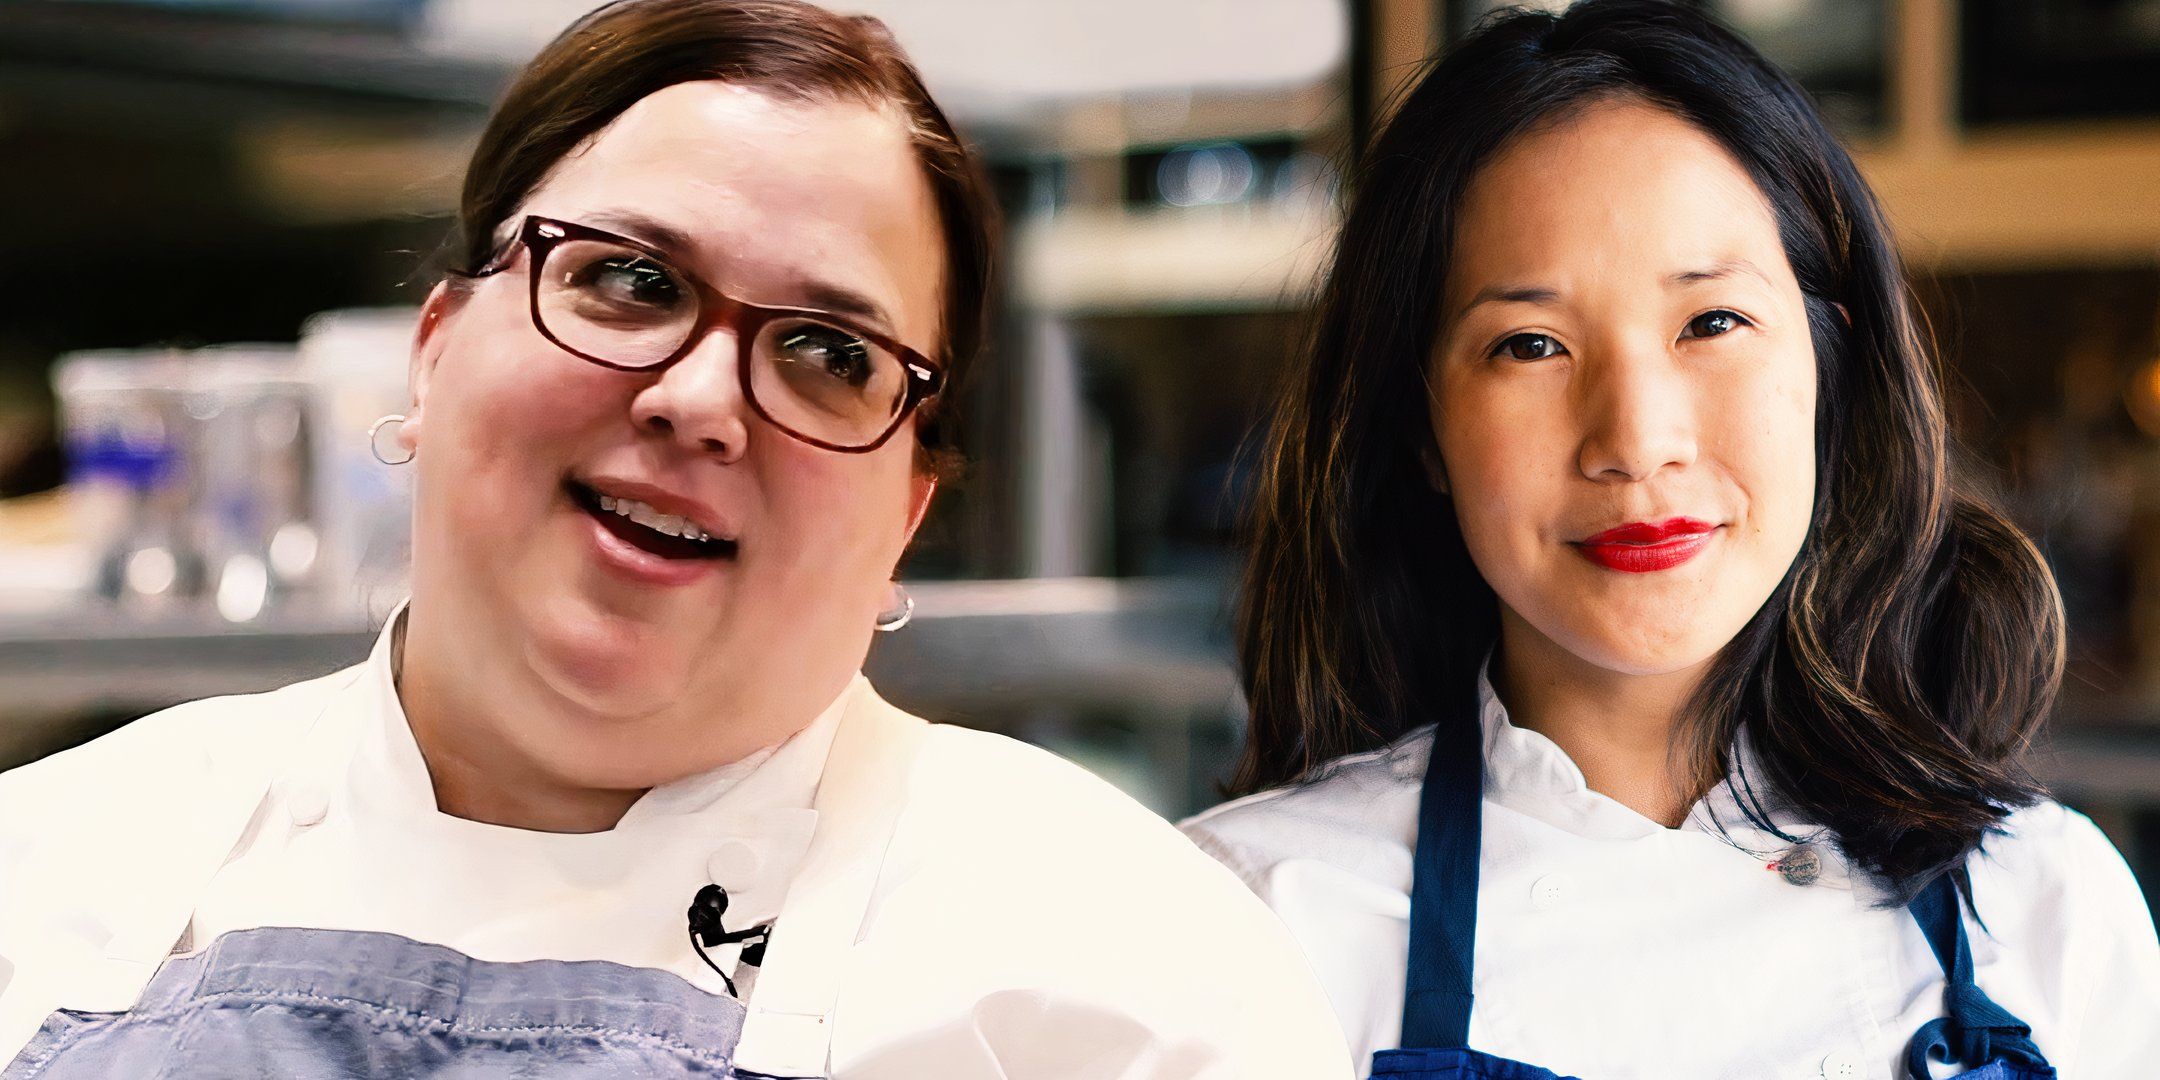 Top Chef's Heather Terhune Was Labeled The Show's Biggest Bully But Beverly Kim Defended Her